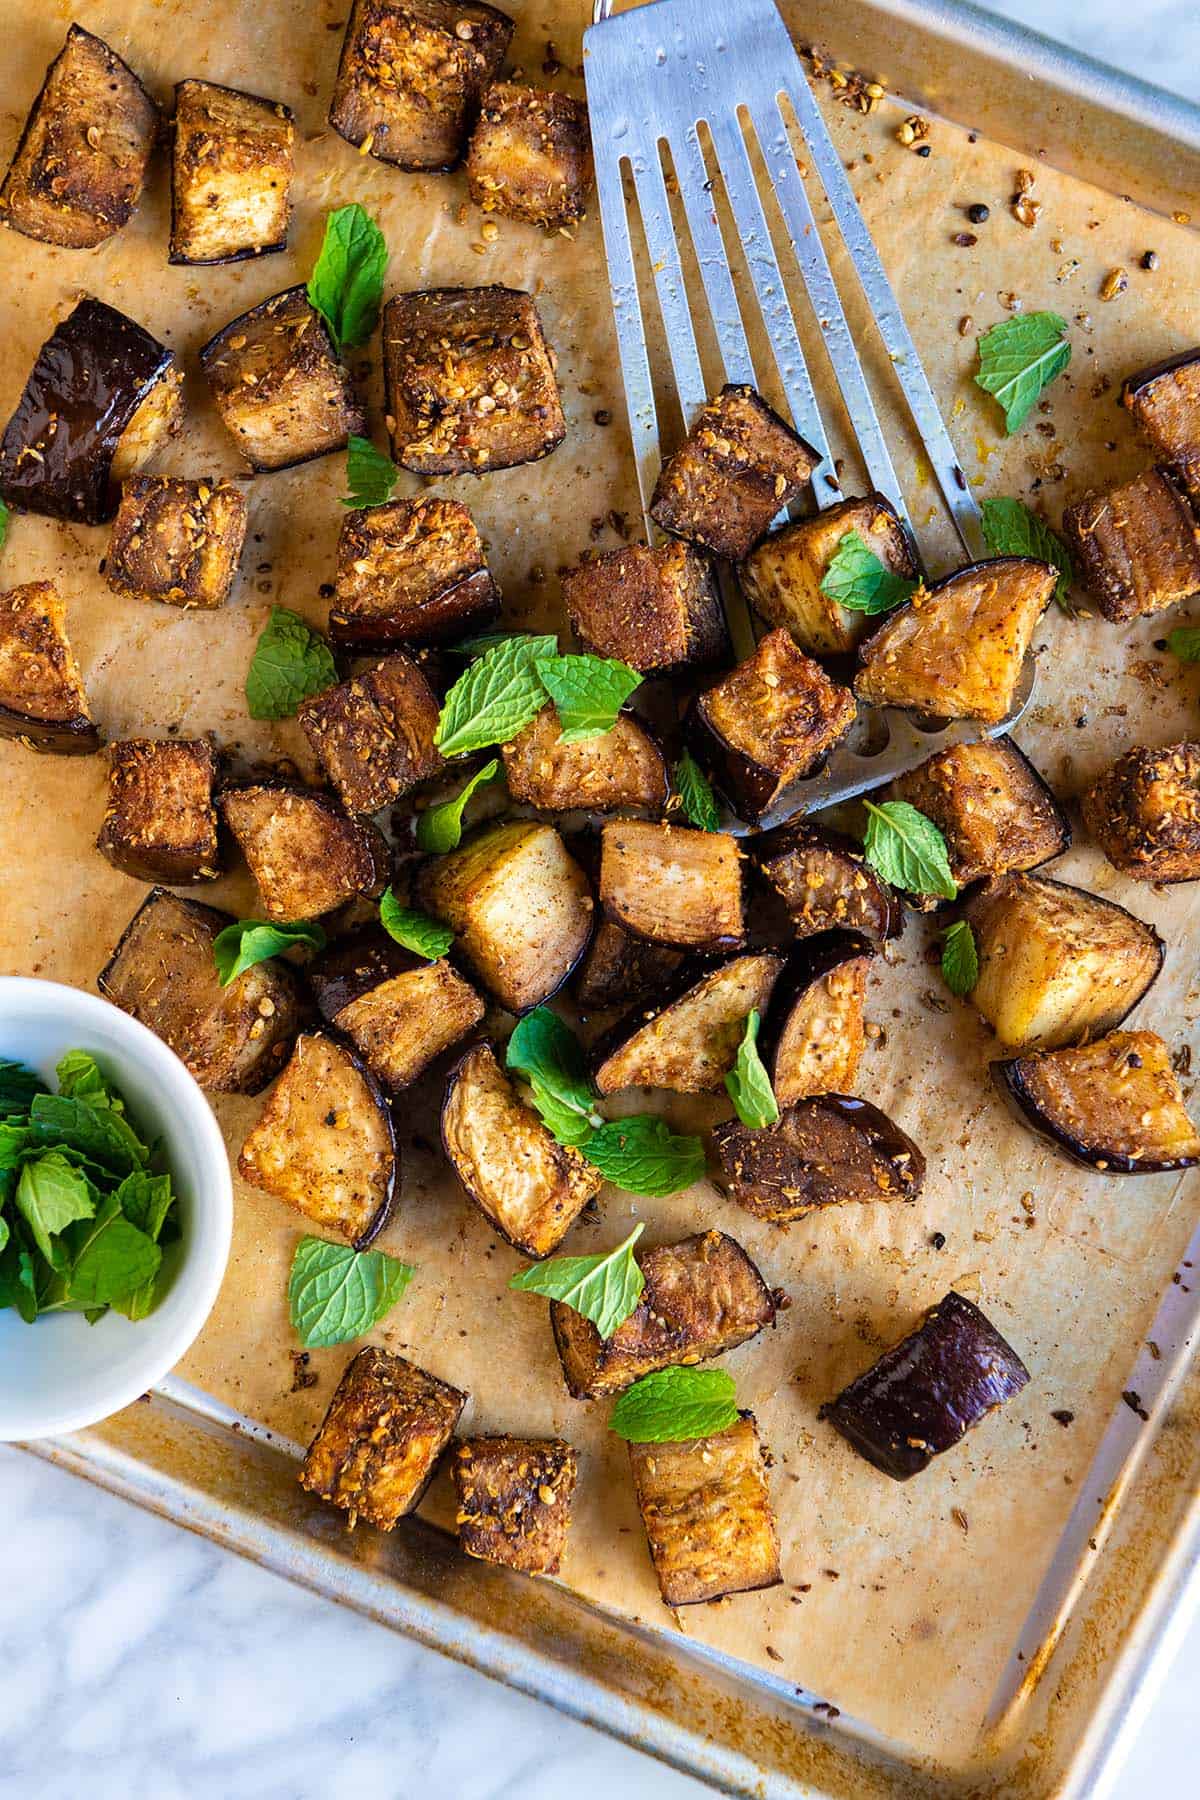 Perfectly roasted eggplant cubes on a baking sheet